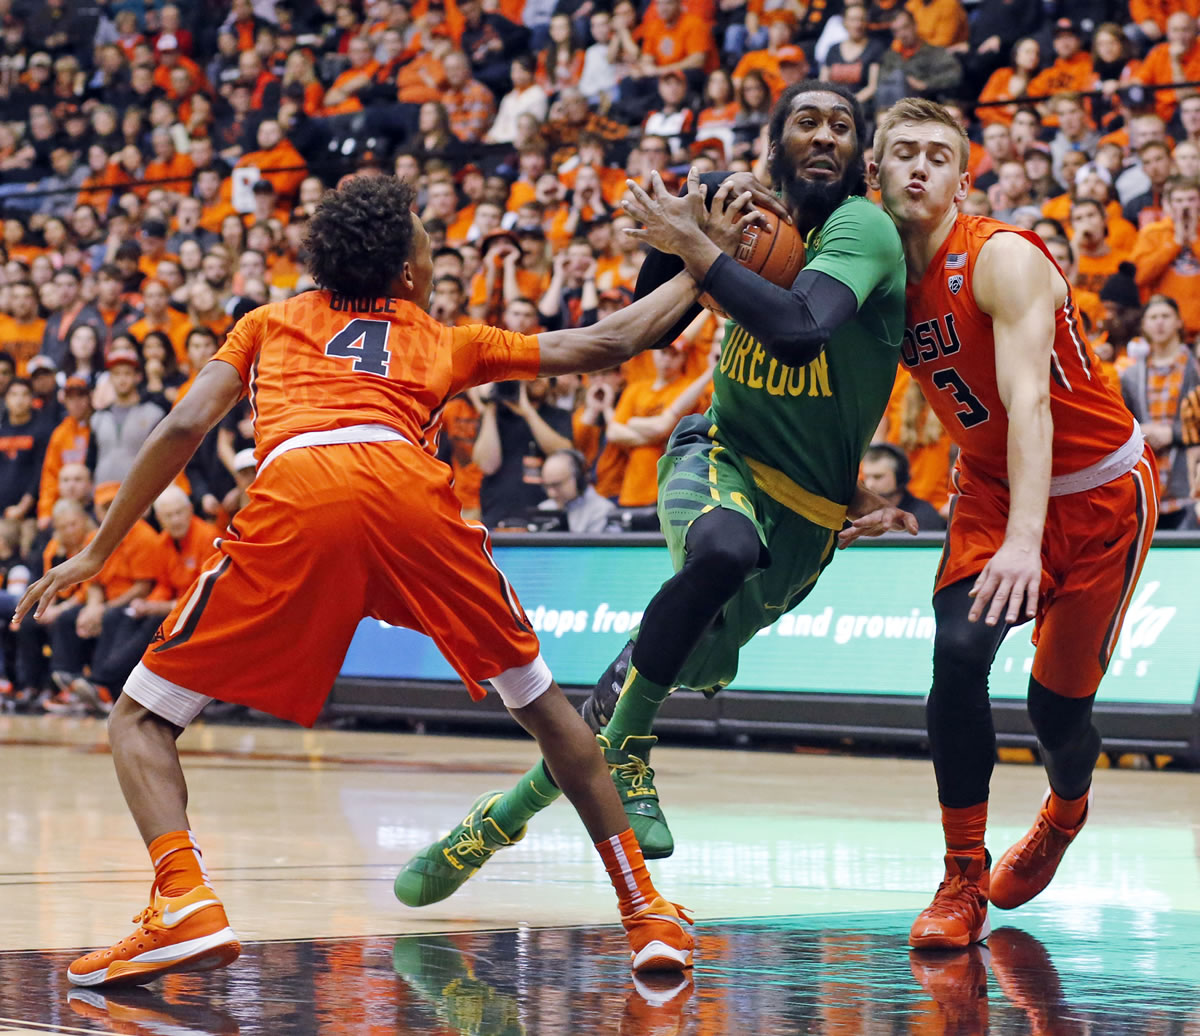 Oregon's Dwanye Benjamin, center, drives between Oregon State's Derrick Bruce, left, and Tres Tinkle, right, in the first half of an NCAA college basketball game in Corvallis, Ore., Sunday, Jan. 3, 2016. (AP Photo/Timothy J.